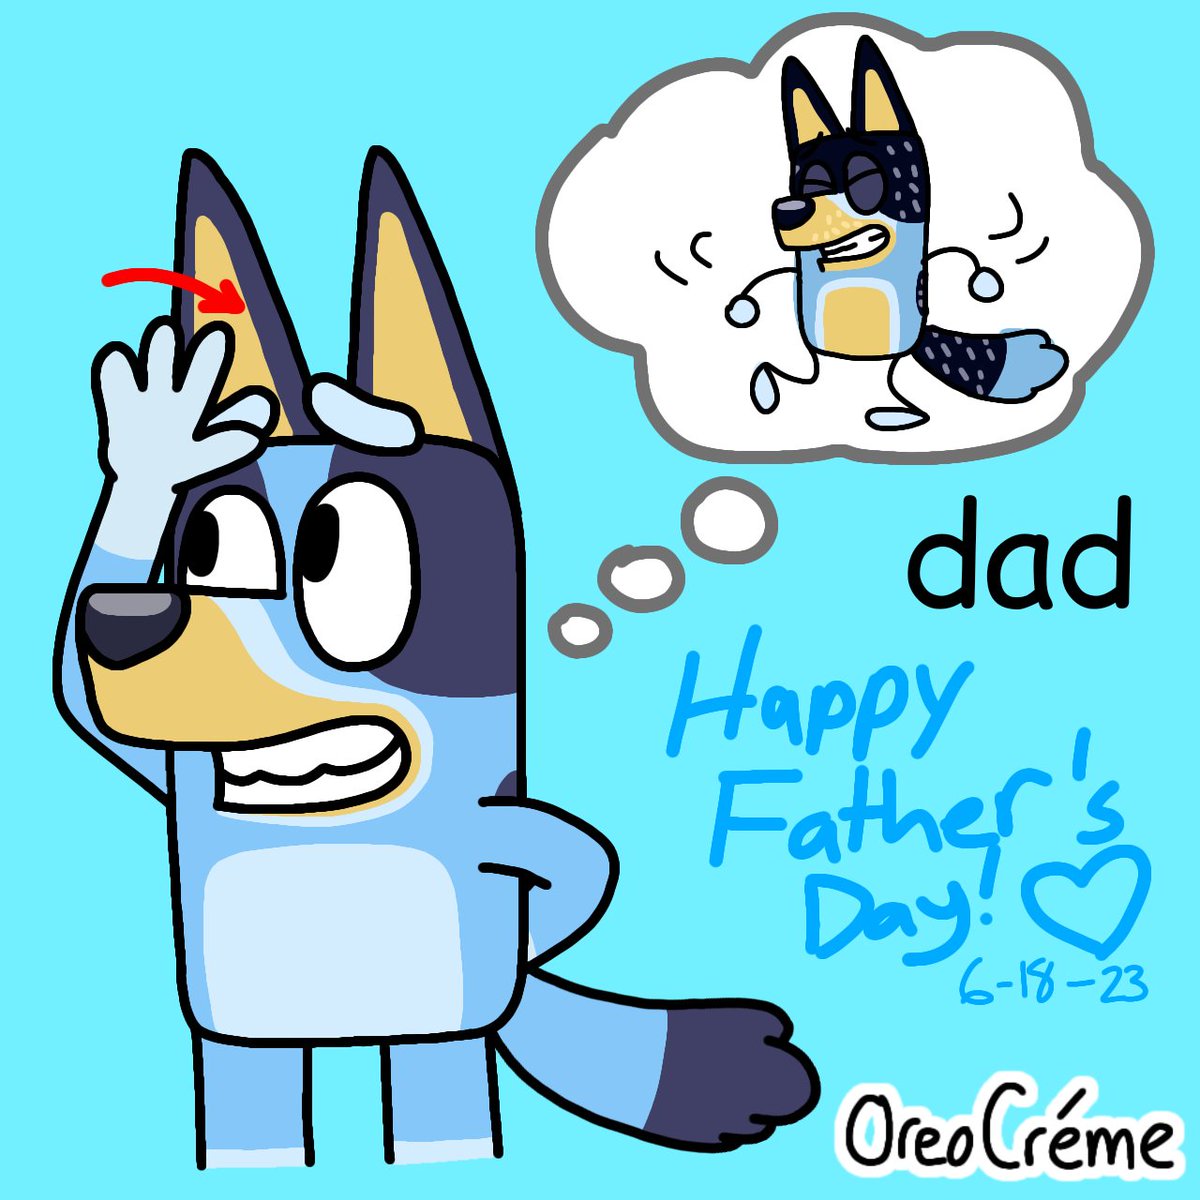 Happy (Belated) Father's Day! 💐 ❤️ 👔 (sorry my drawing was a bit late. I was on vacation for the weekend...) #FathersDay #SignLanguage #auslan #ASL #americansignlanguage #bluey #blueyheeler